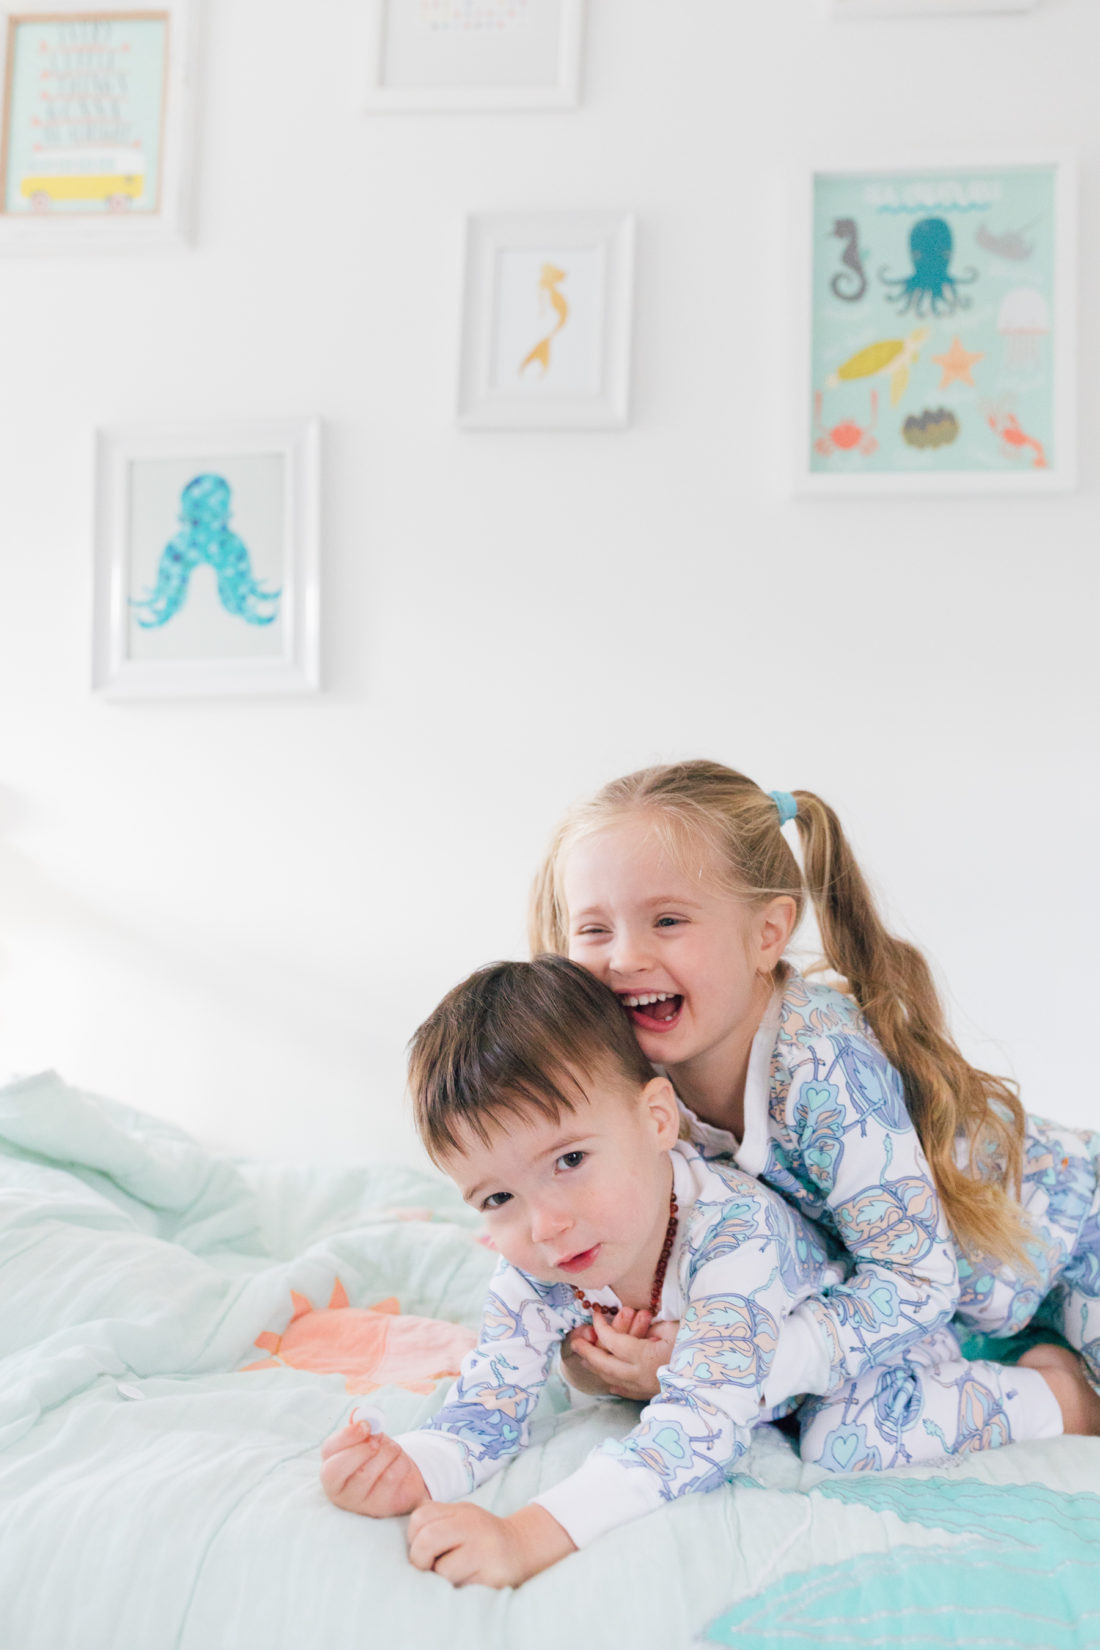 Marlowe Martino gives little brother Major a big hug while wearing matching blue bug pajamas from the Happily Eva After x Masala Baby capsule collection